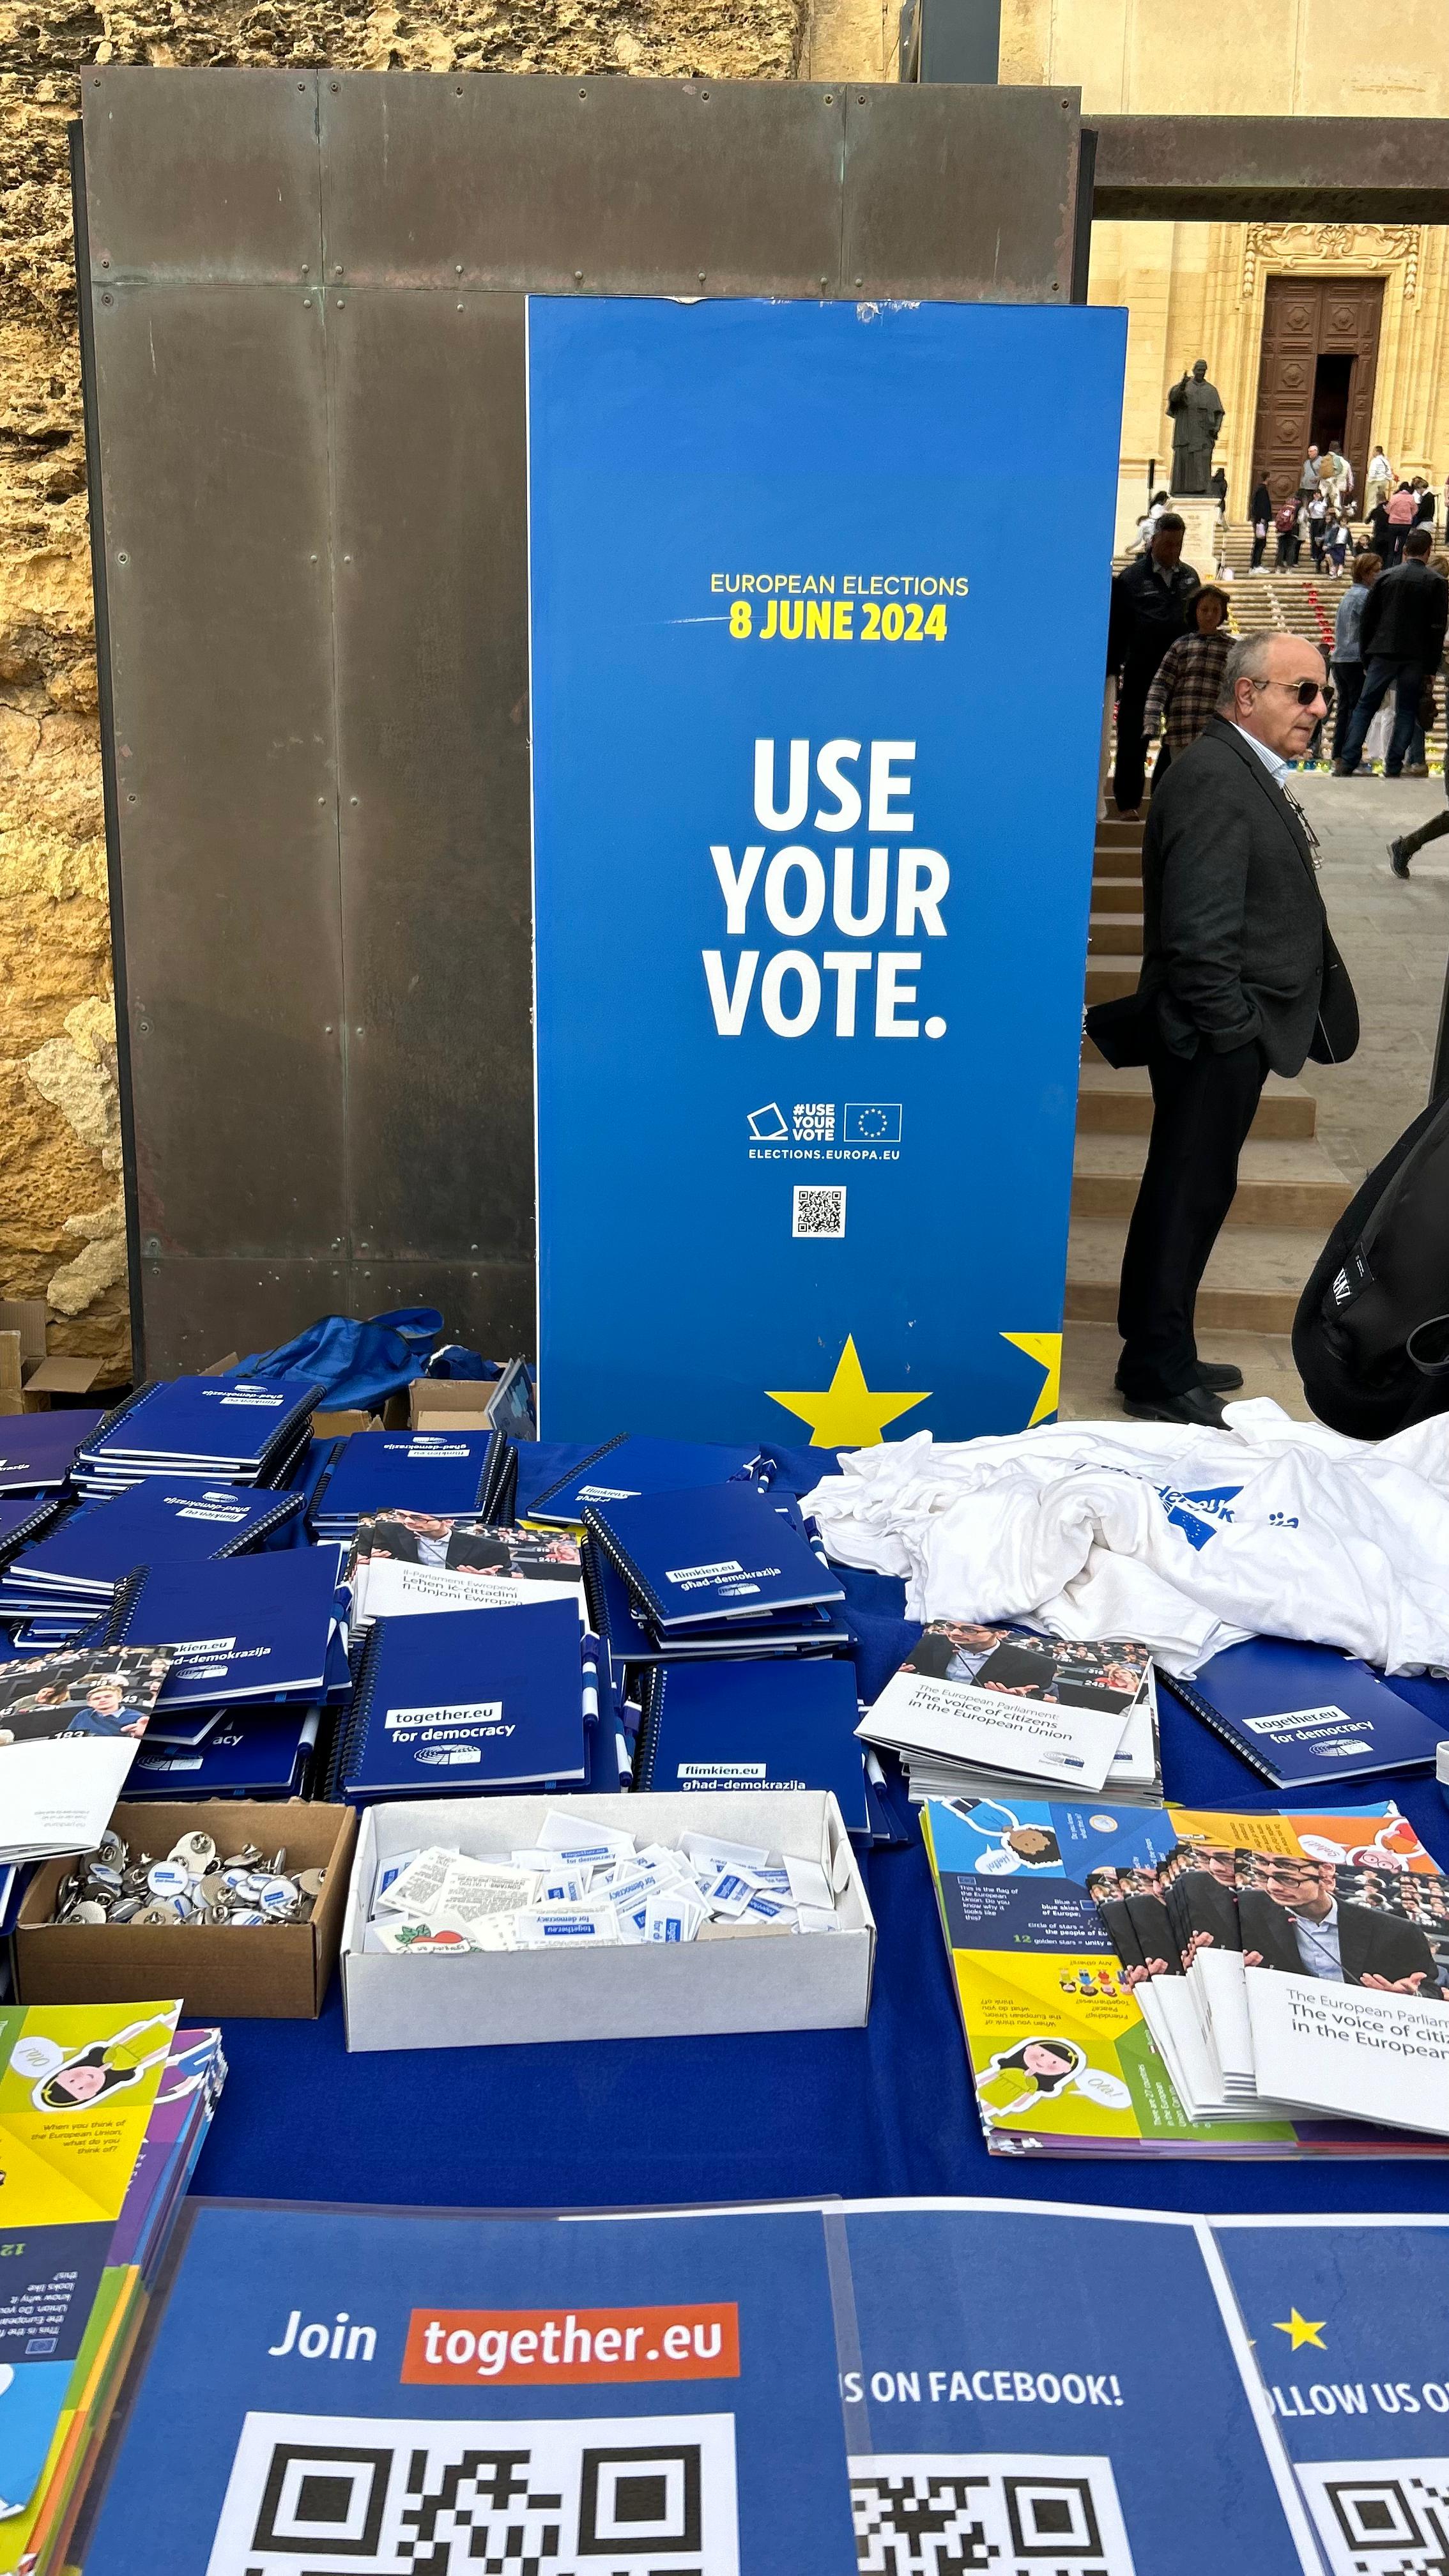 #UseYourVote stand at the 'Lejl Imkebbes' Festival